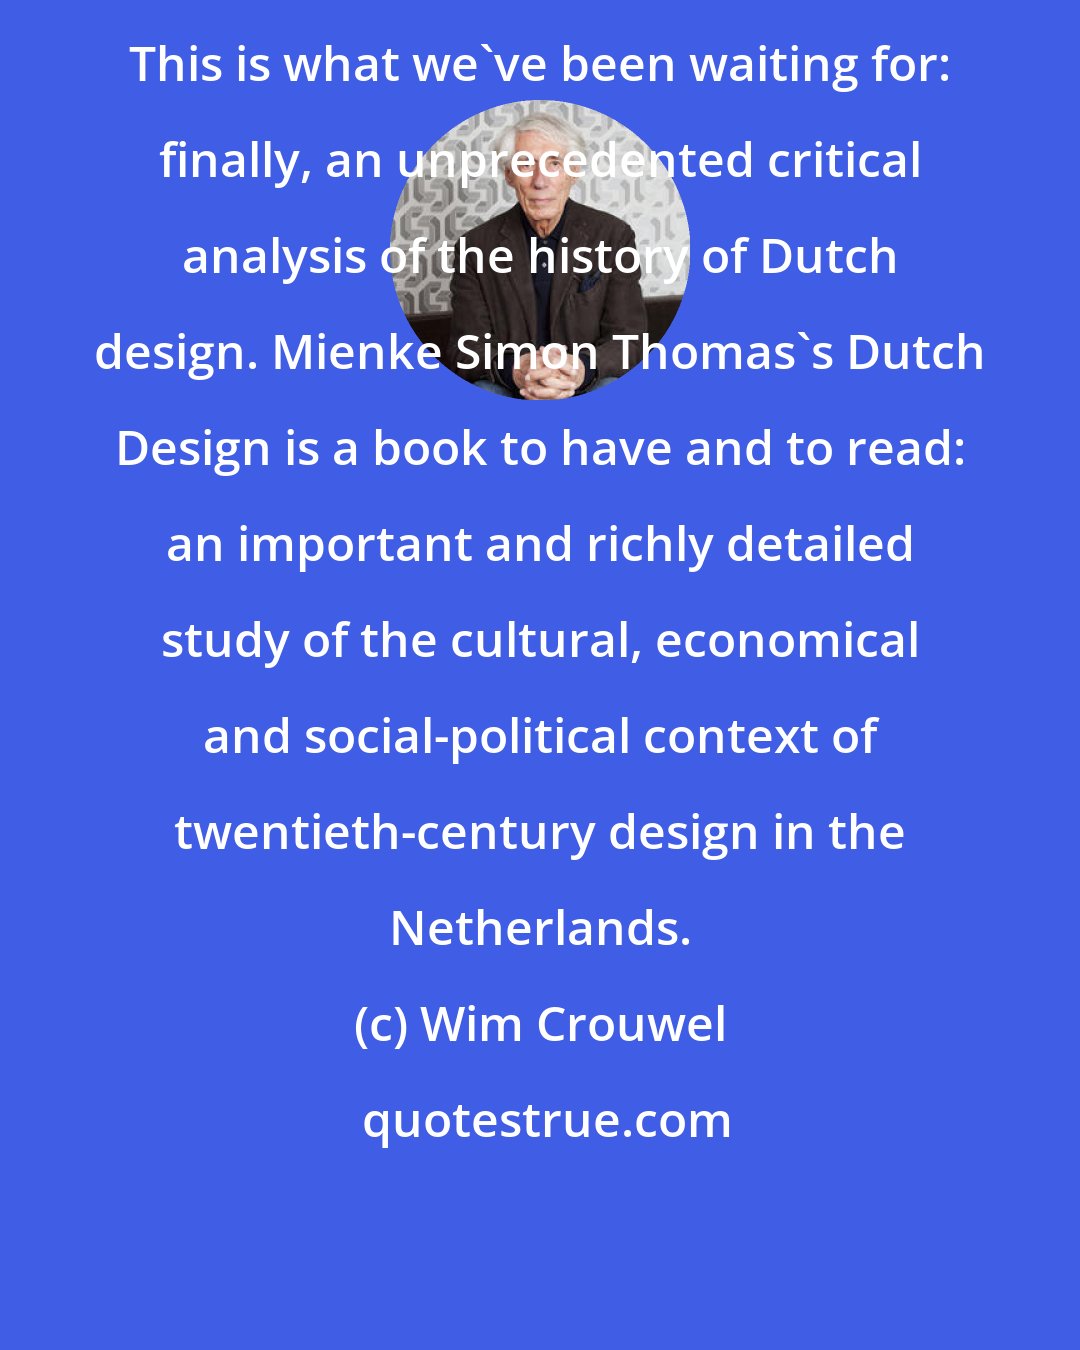 Wim Crouwel: This is what we've been waiting for: finally, an unprecedented critical analysis of the history of Dutch design. Mienke Simon Thomas's Dutch Design is a book to have and to read: an important and richly detailed study of the cultural, economical and social-political context of twentieth-century design in the Netherlands.